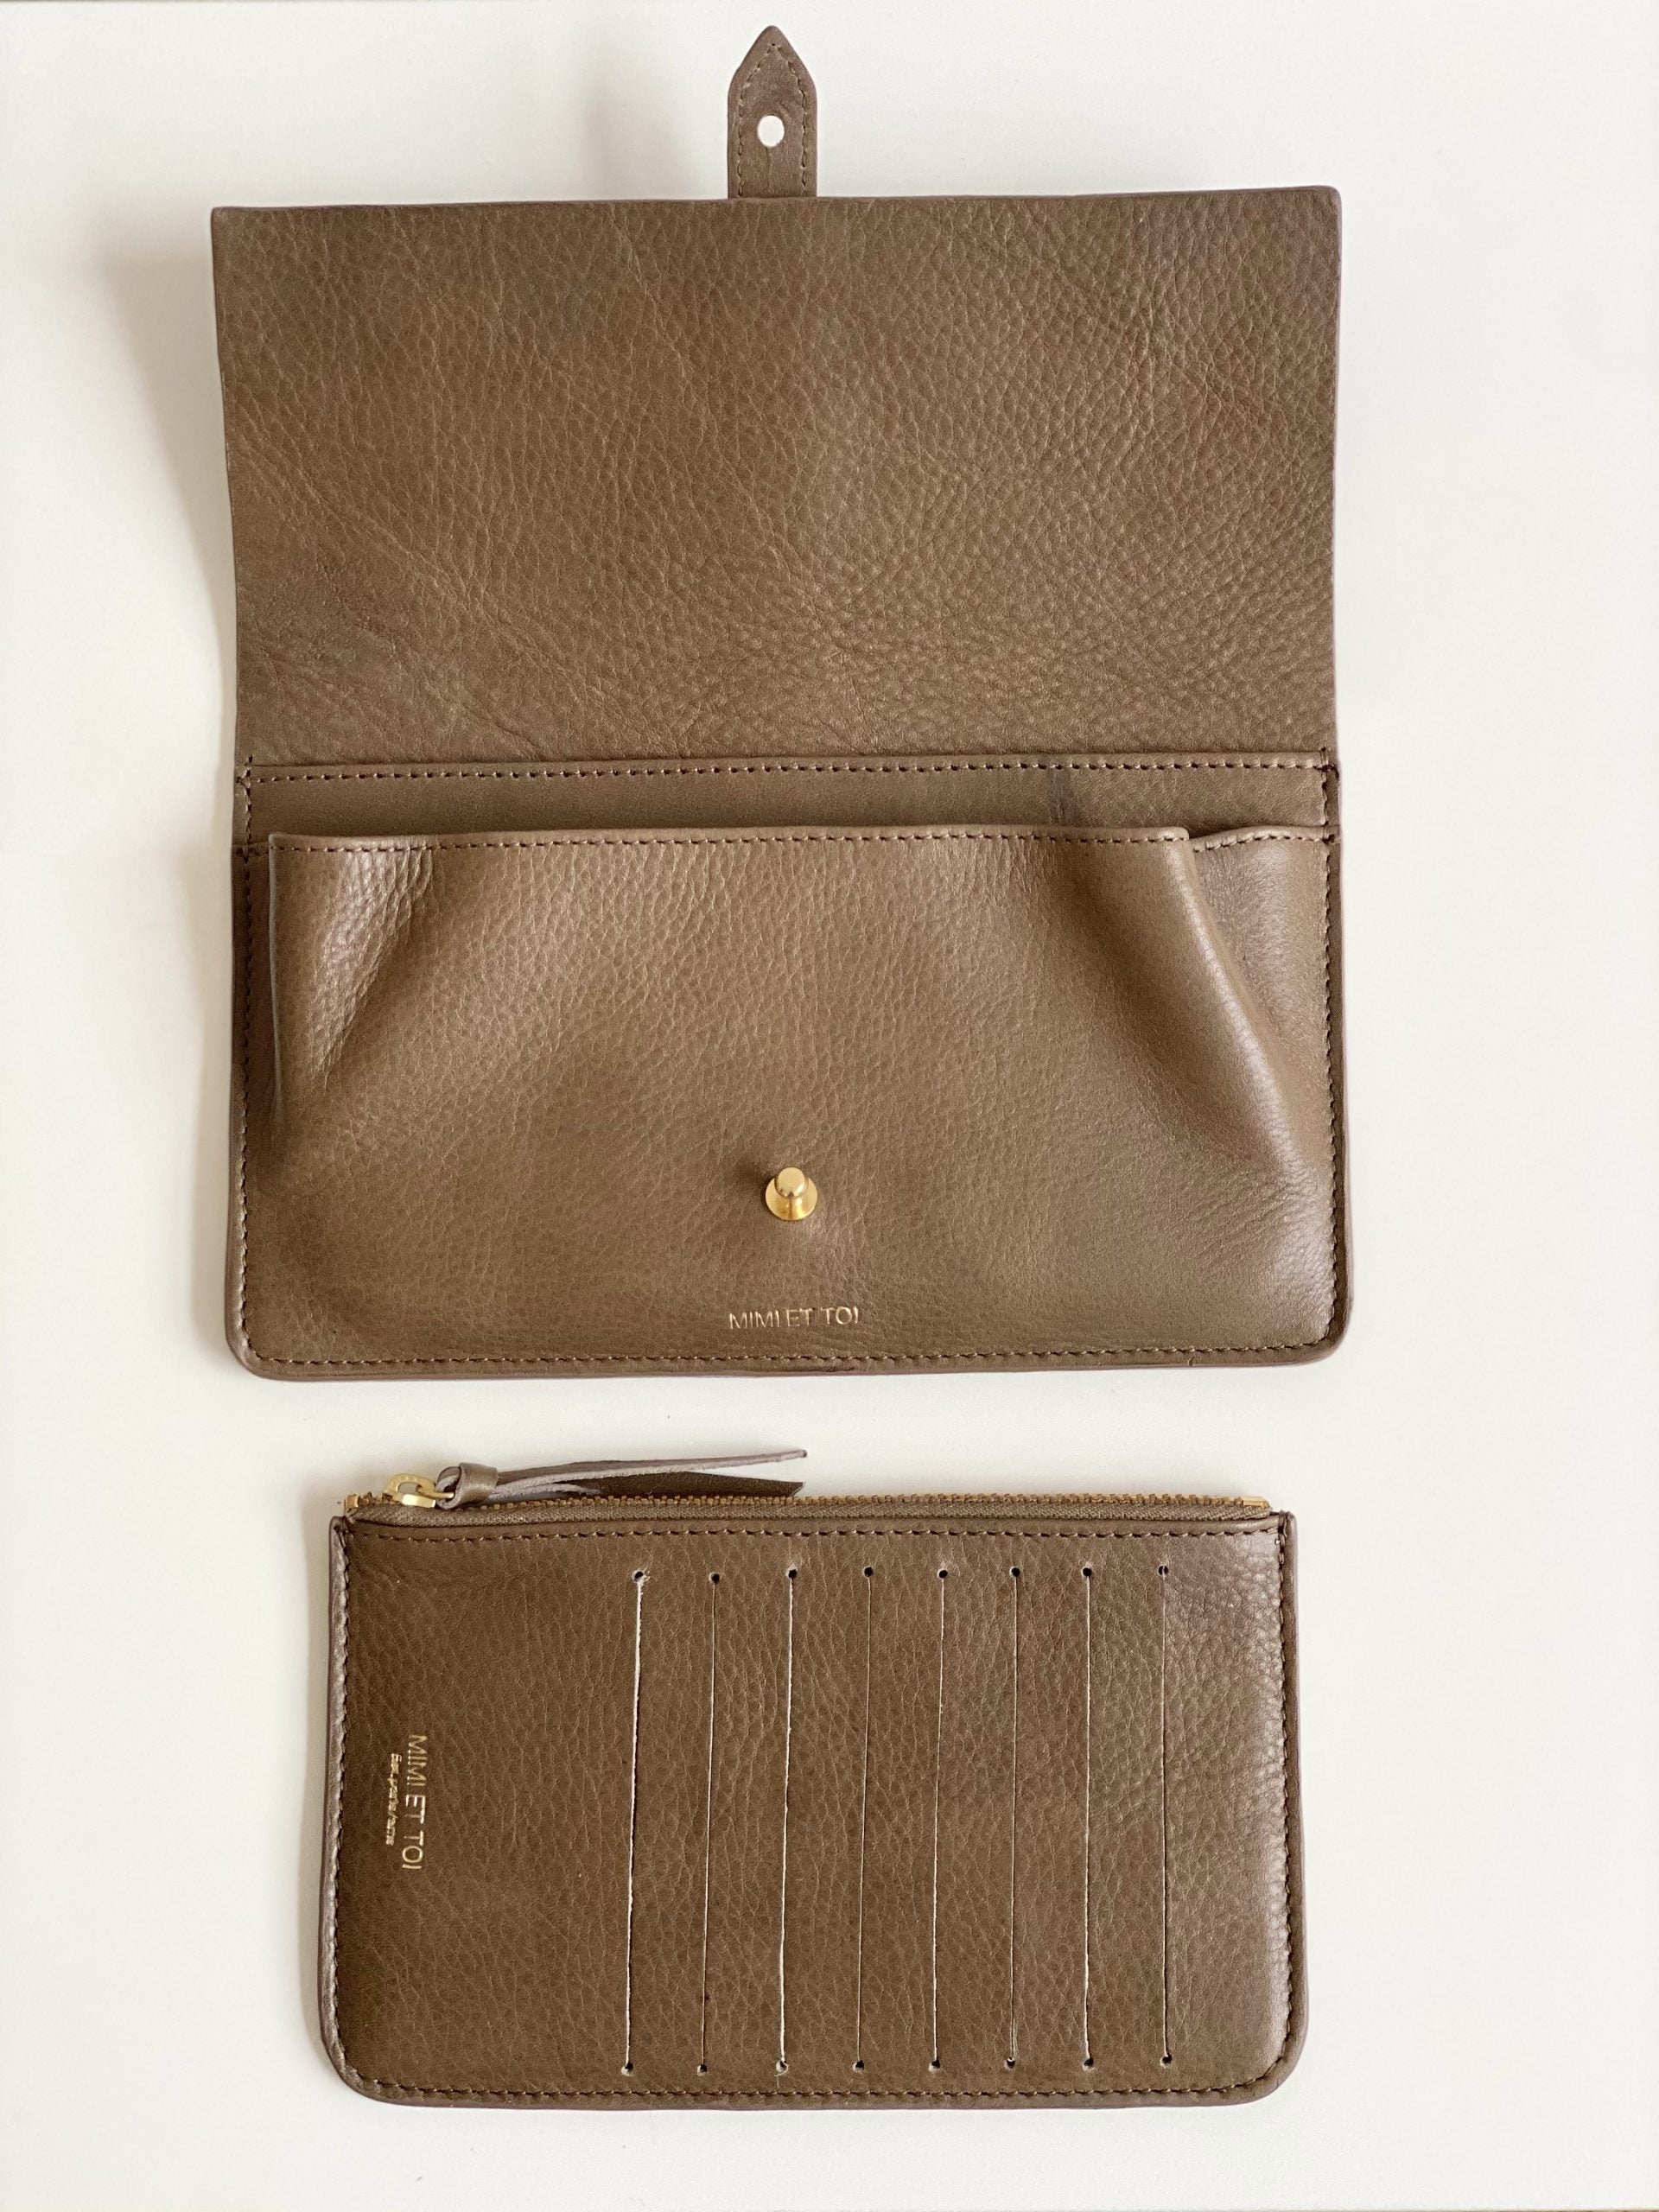 Spencer Full Leather Wallet Taupe